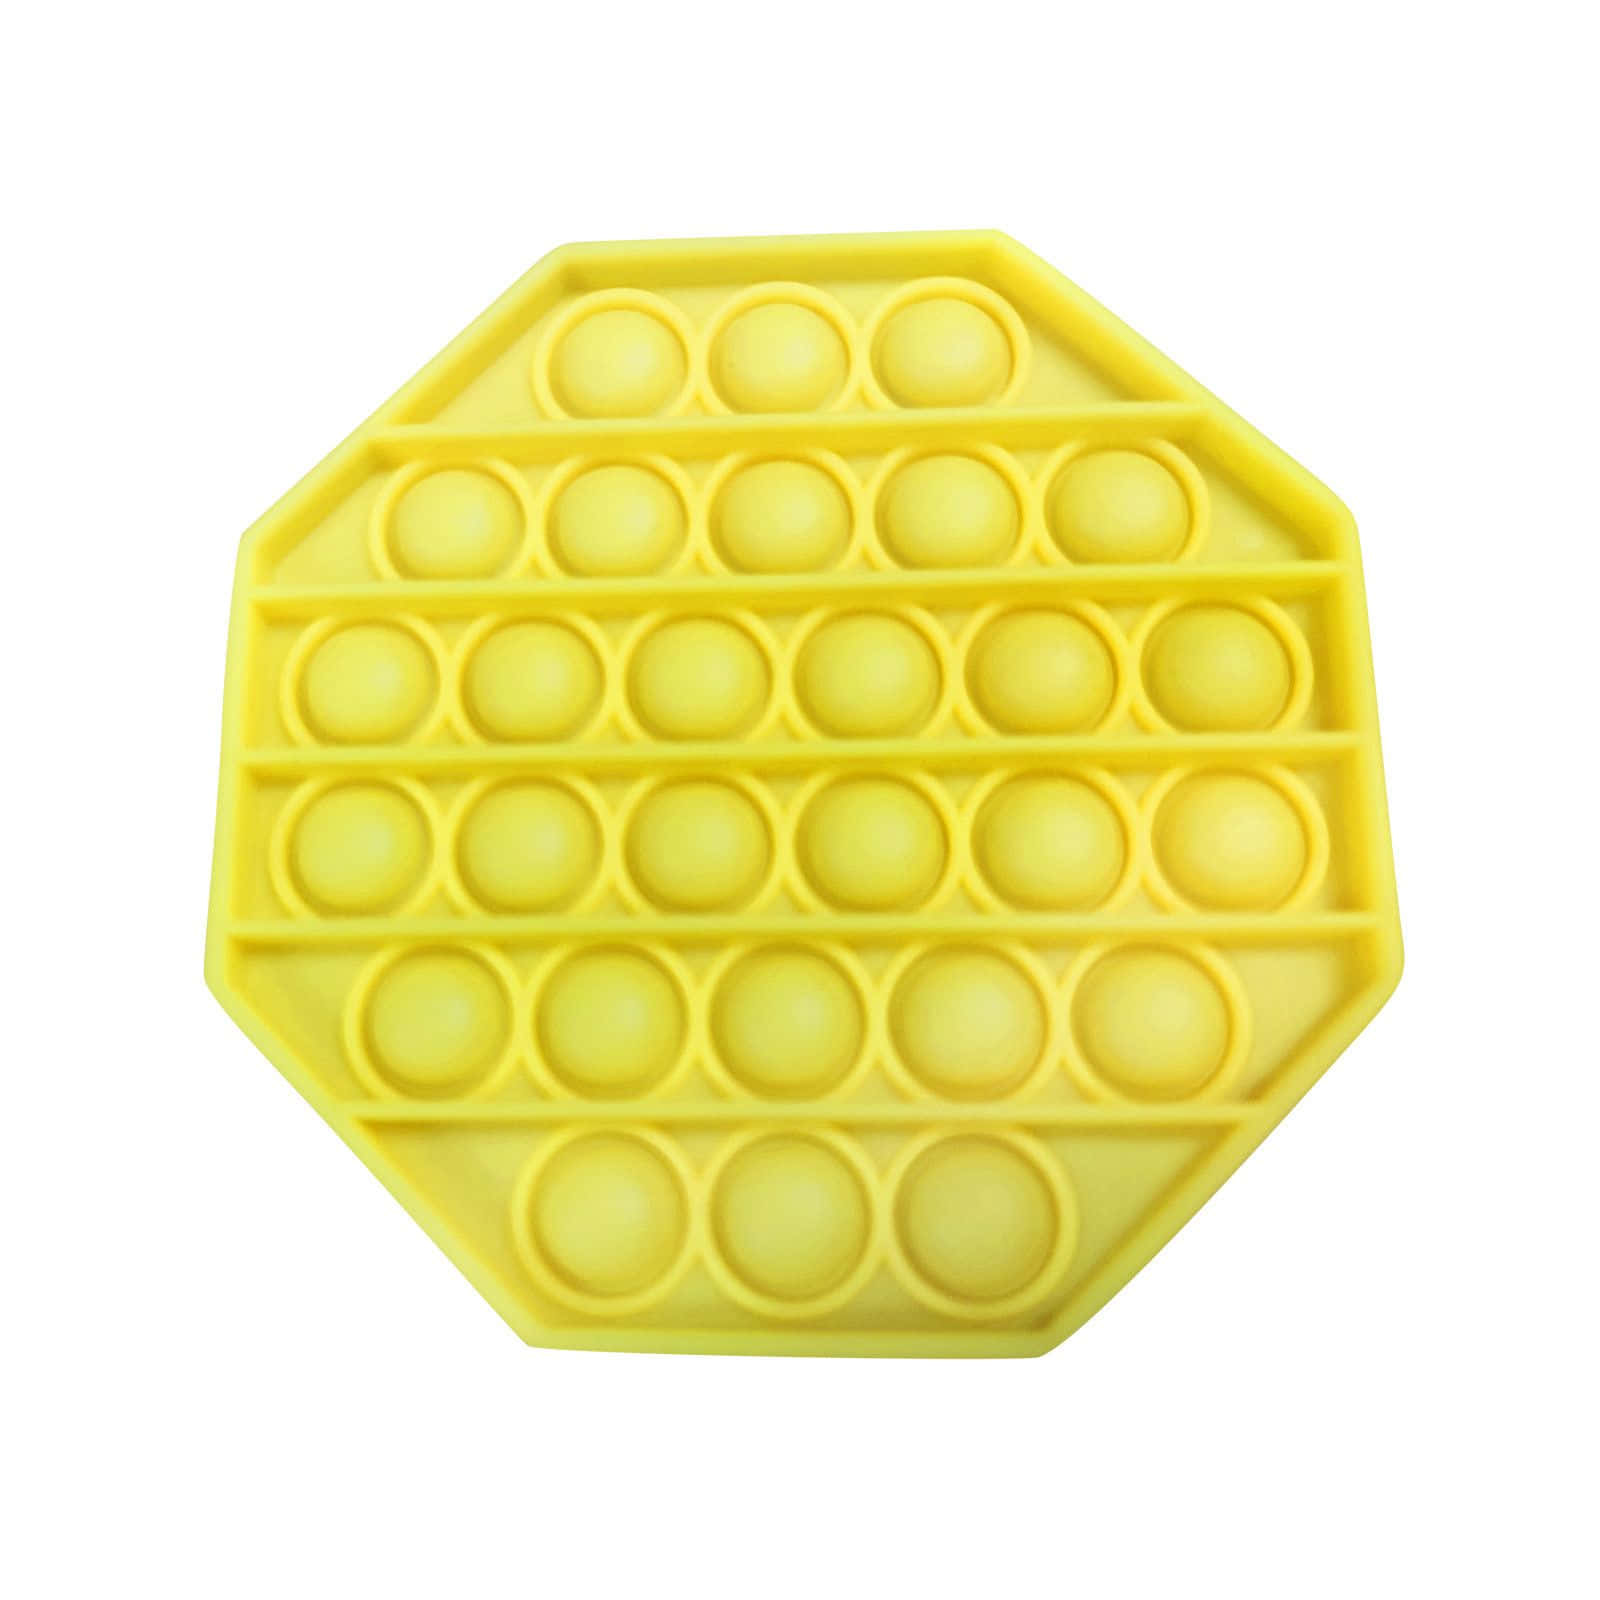 A Yellow Plastic Tray With A Yellow Circle On It